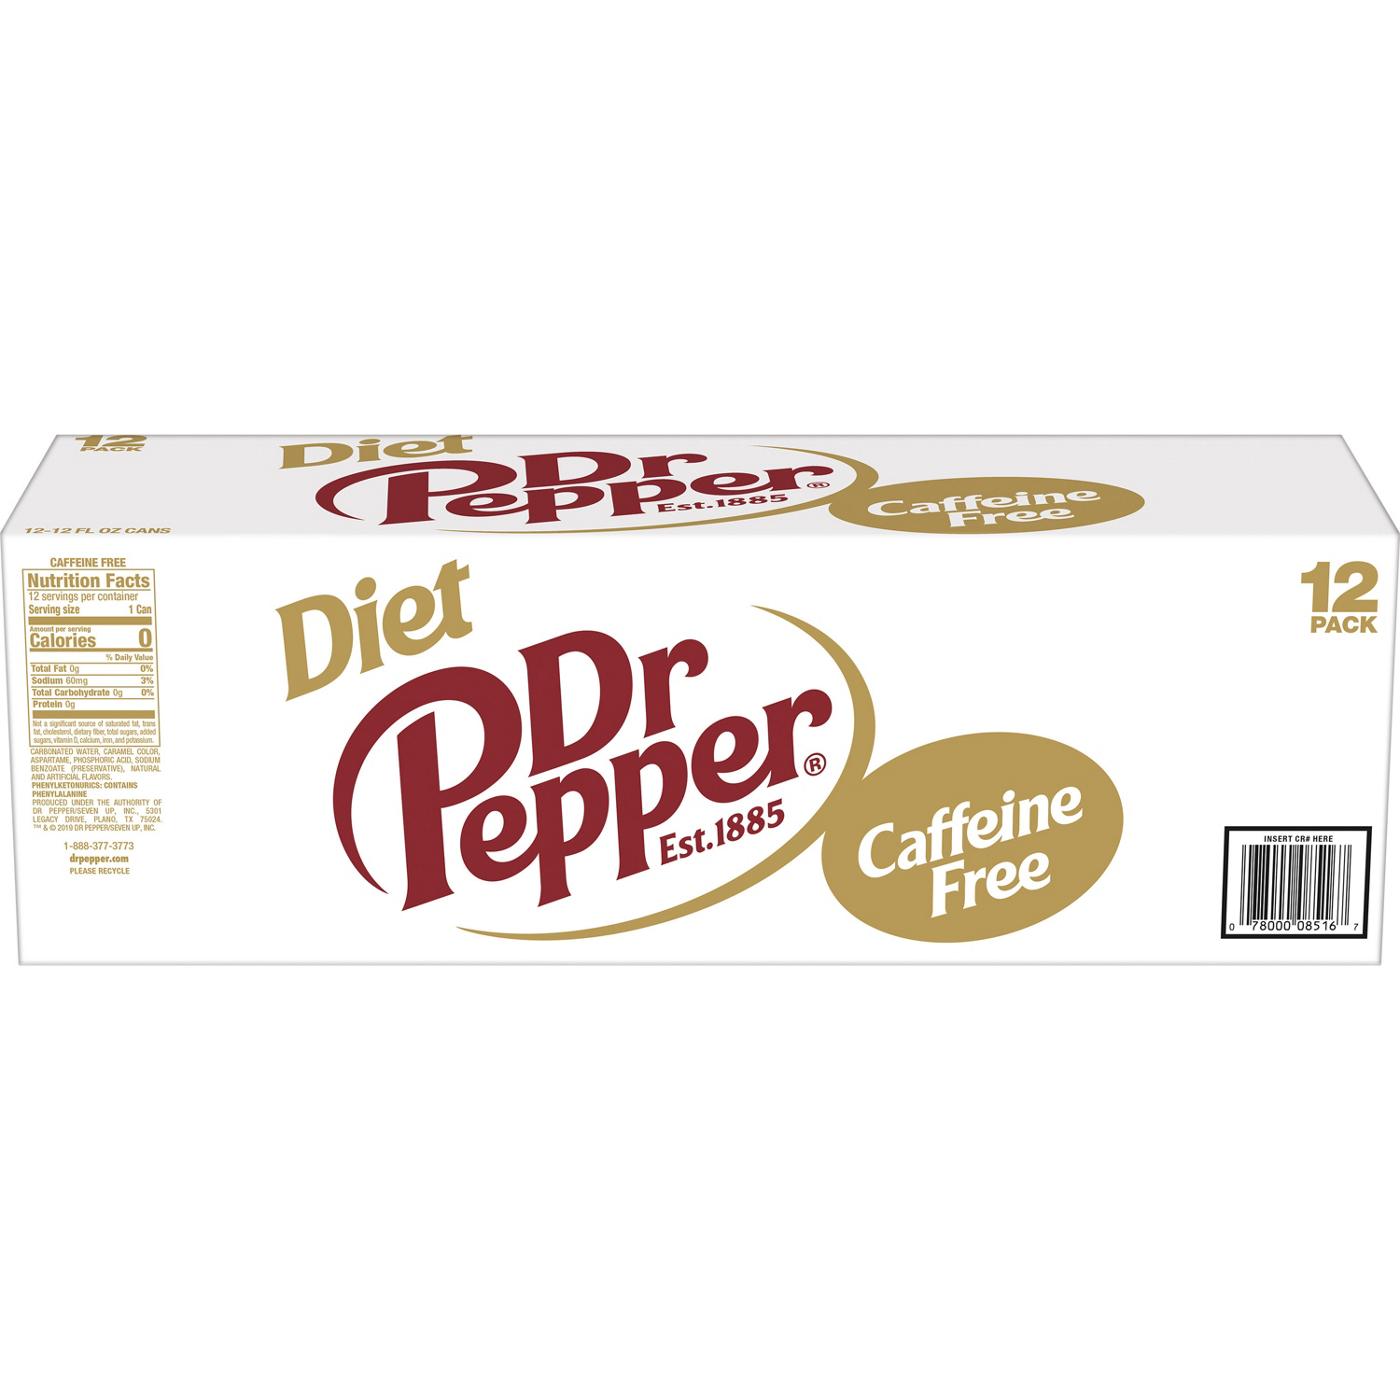 Dr Pepper Caffeine Free Diet Soda 12 oz Cans; image 7 of 7